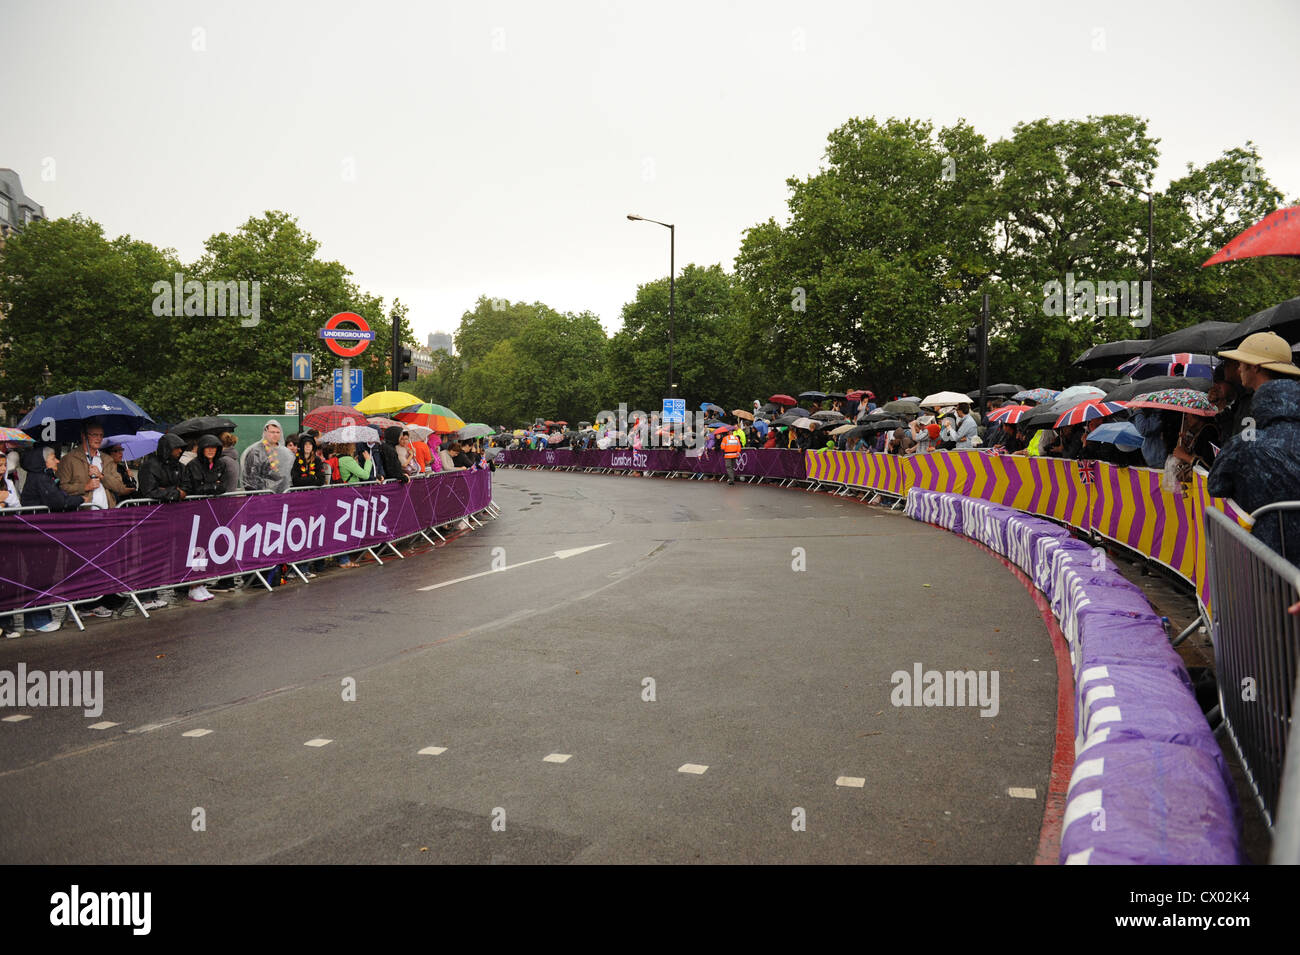 Crowds line the street waiting for the women's cycling road race at the London 2012 Olympics Stock Photo